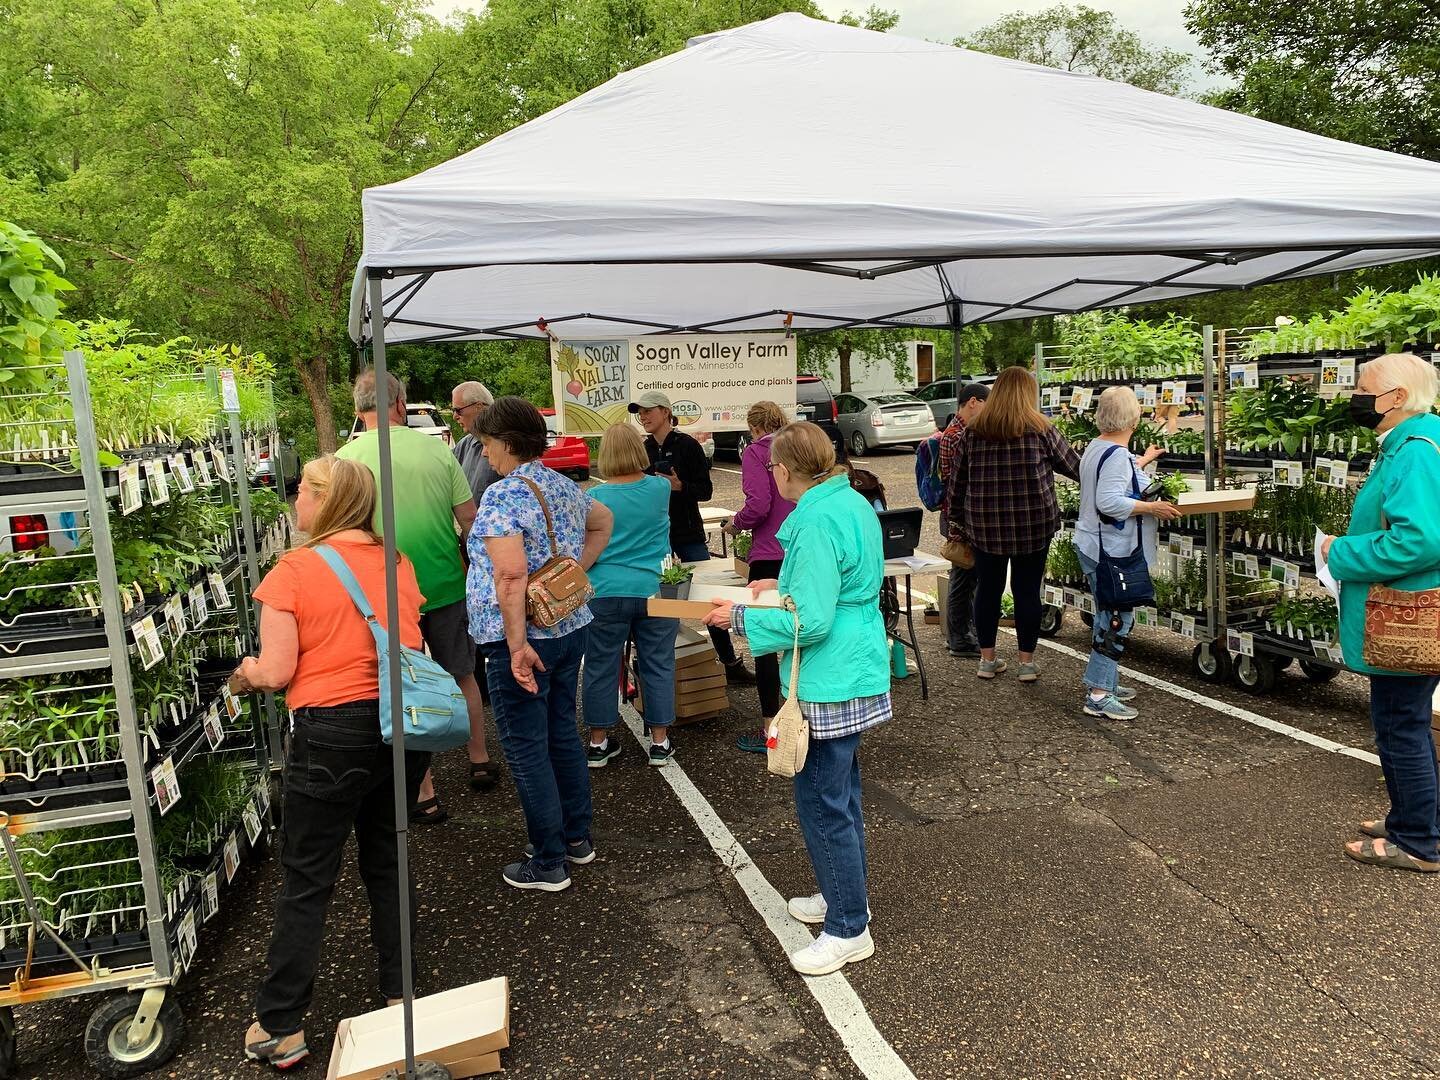 LAST NATIVE PLANT SALE OF THE SEASON! Come join us at the Landscape Revival today in Shoreview until 1:00 for a wide variety of pollinator-friendly native plants. There are several another native plant vendors here so you are bound to find the specie